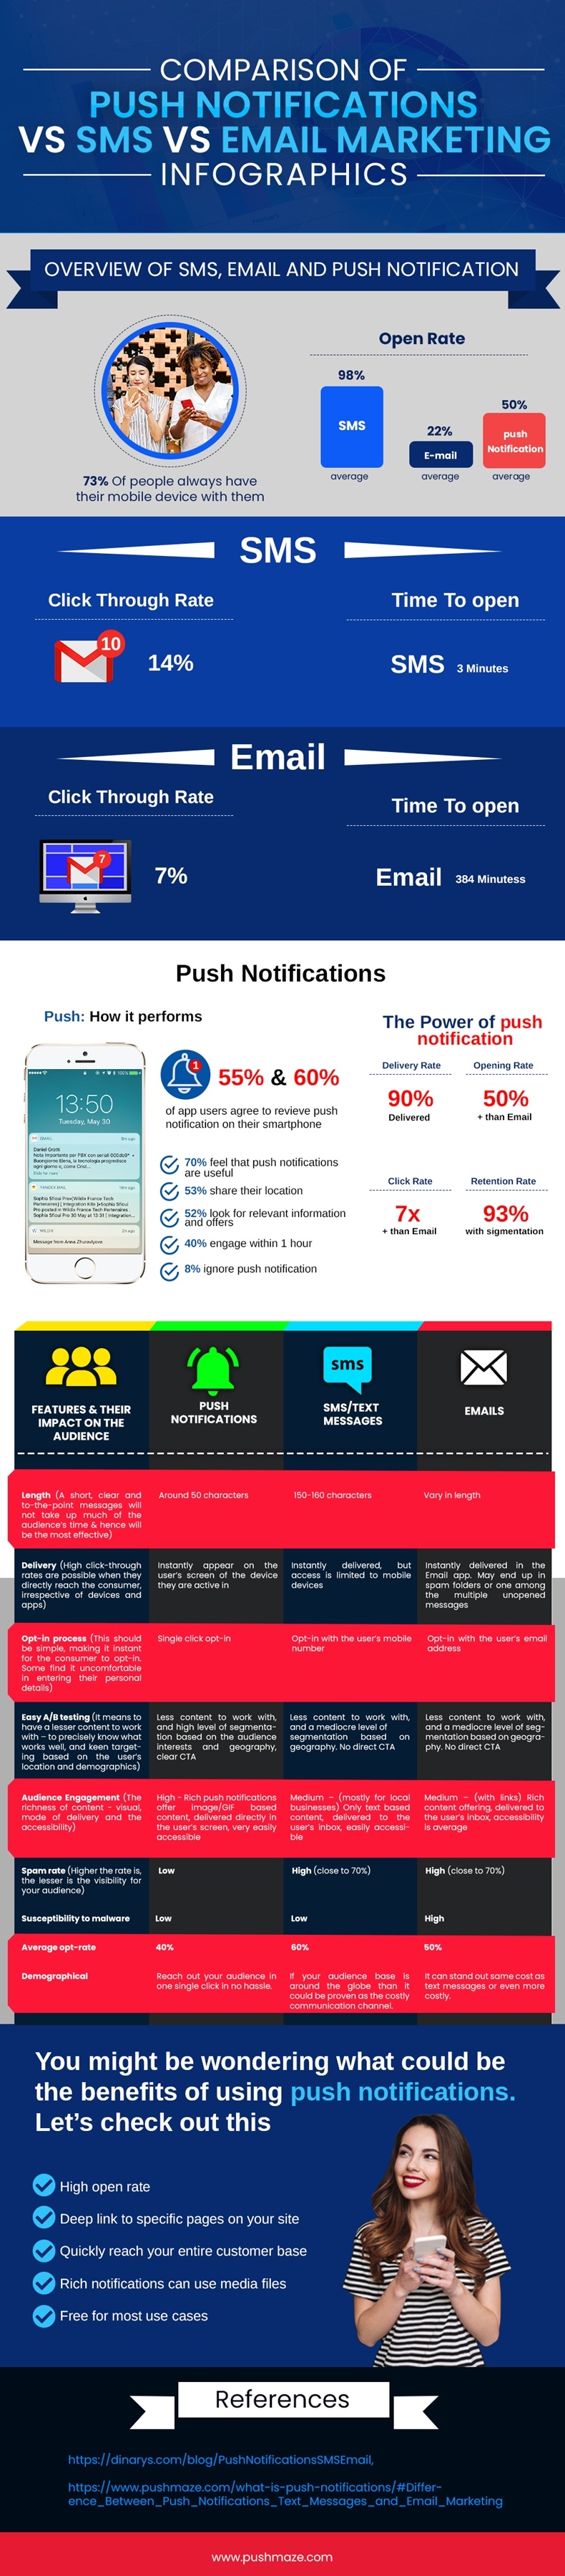 Push Notifications vs. SMS vs. Email: A Comparison [Infographic]